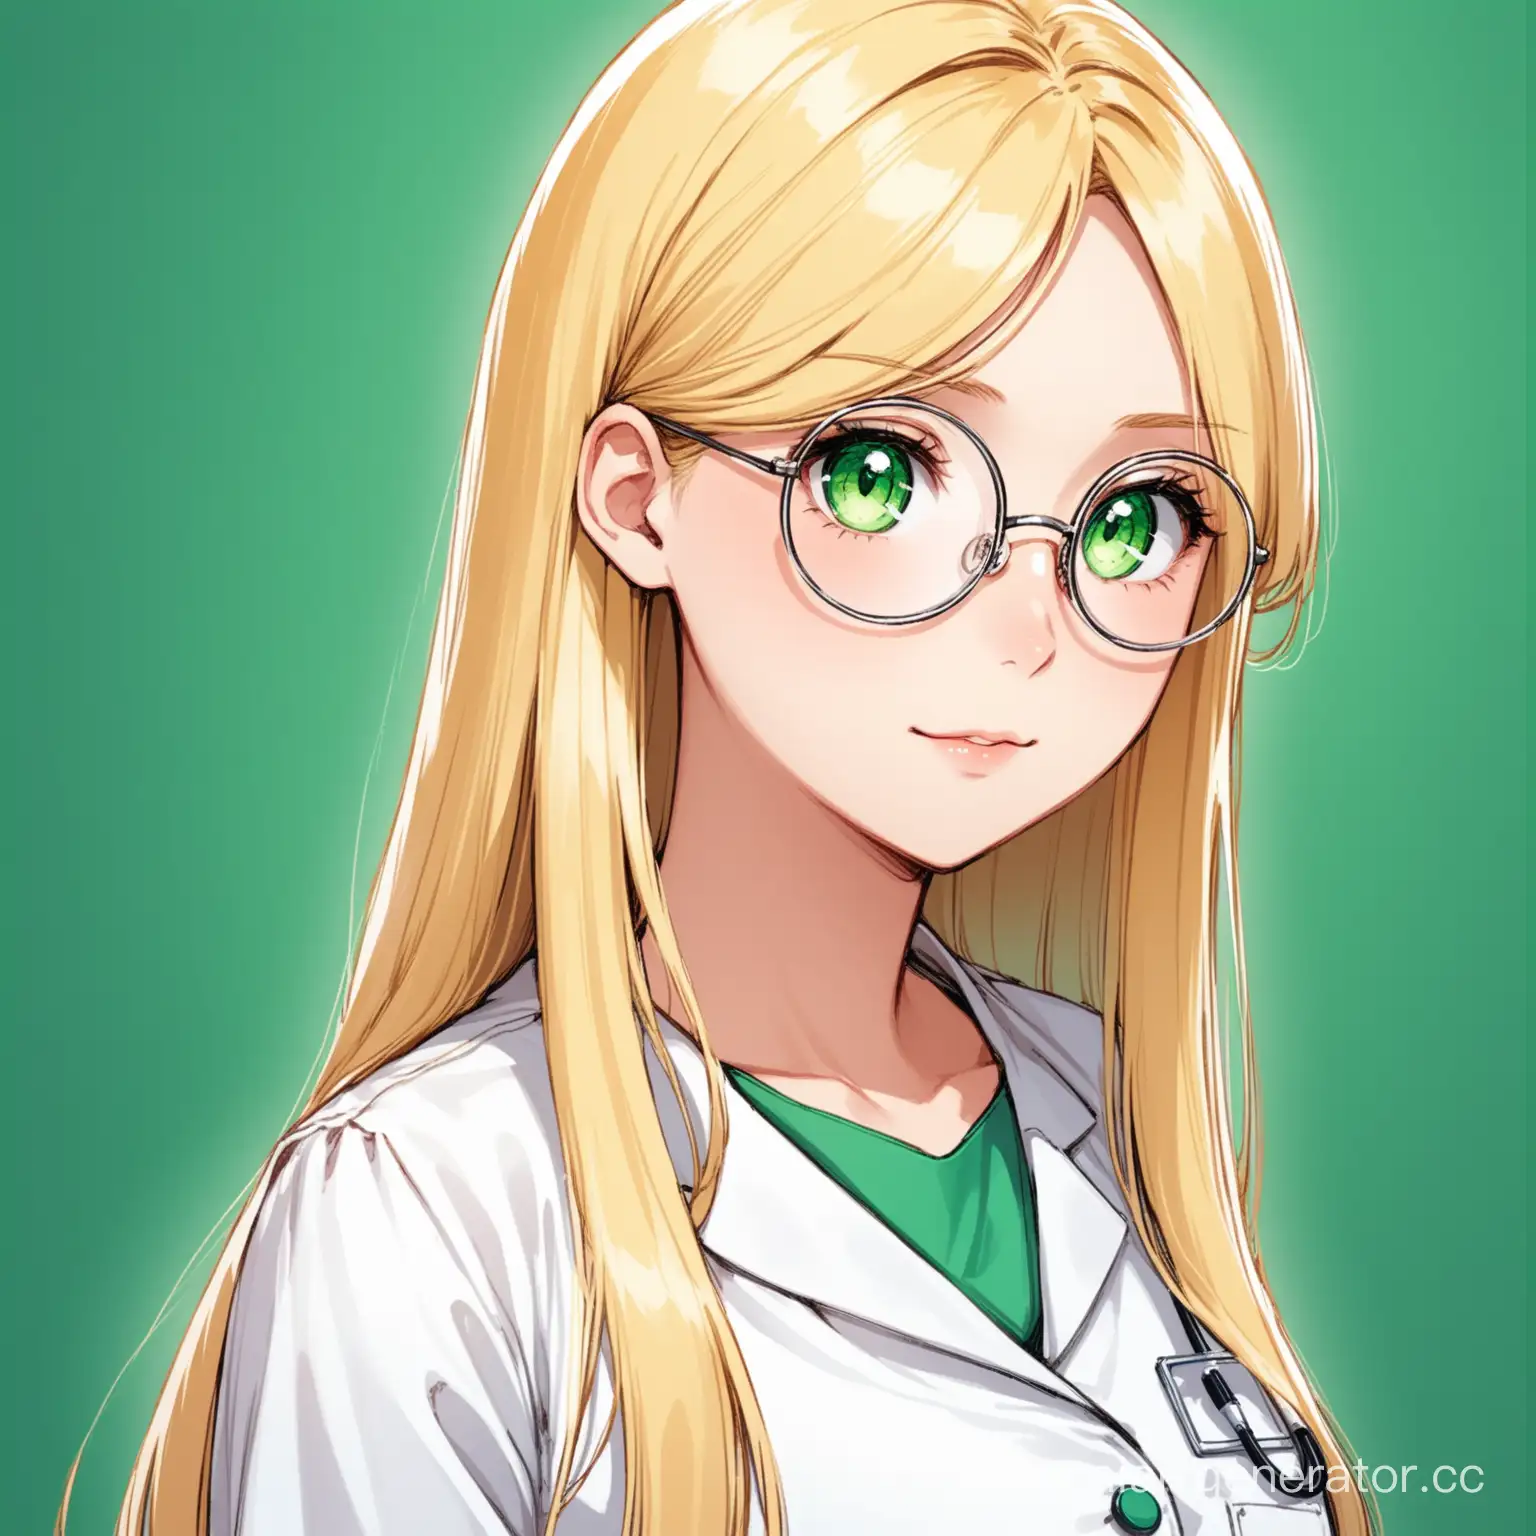 Young-Woman-in-Medical-Attire-with-Glasses